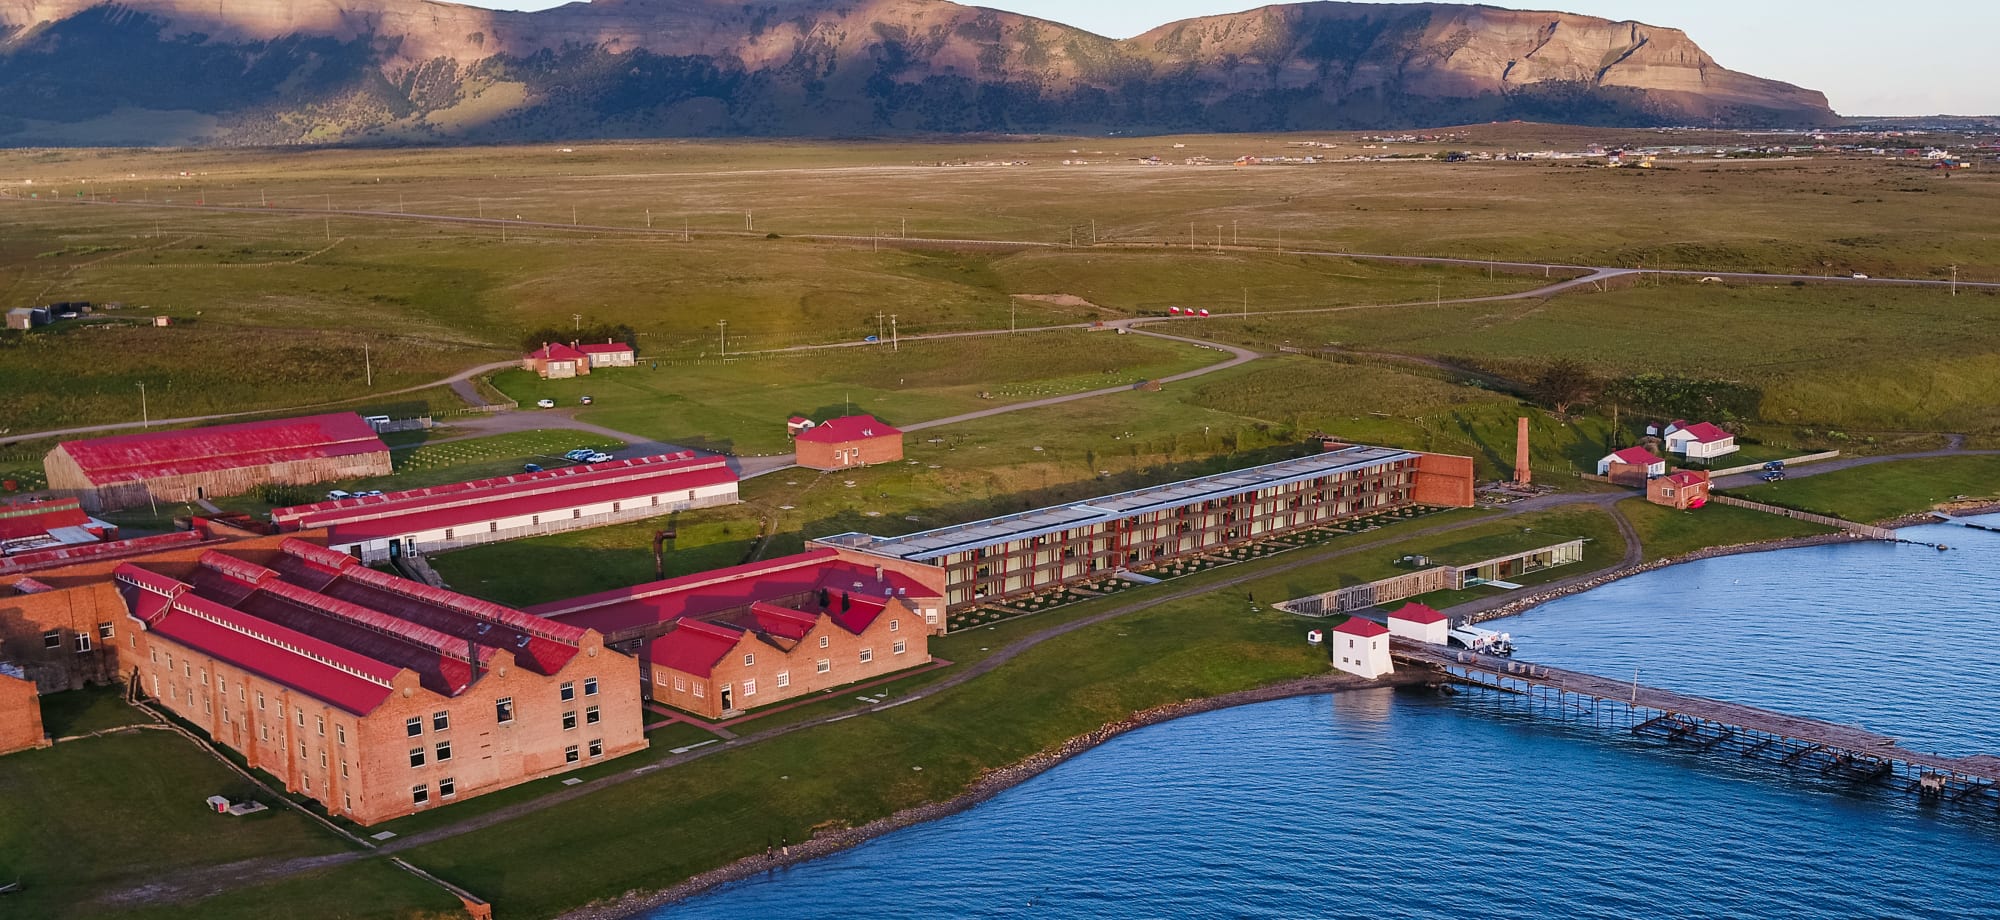 The Singular Patagonia is a long, red-roofed building on the waterfront with mountains in the background.